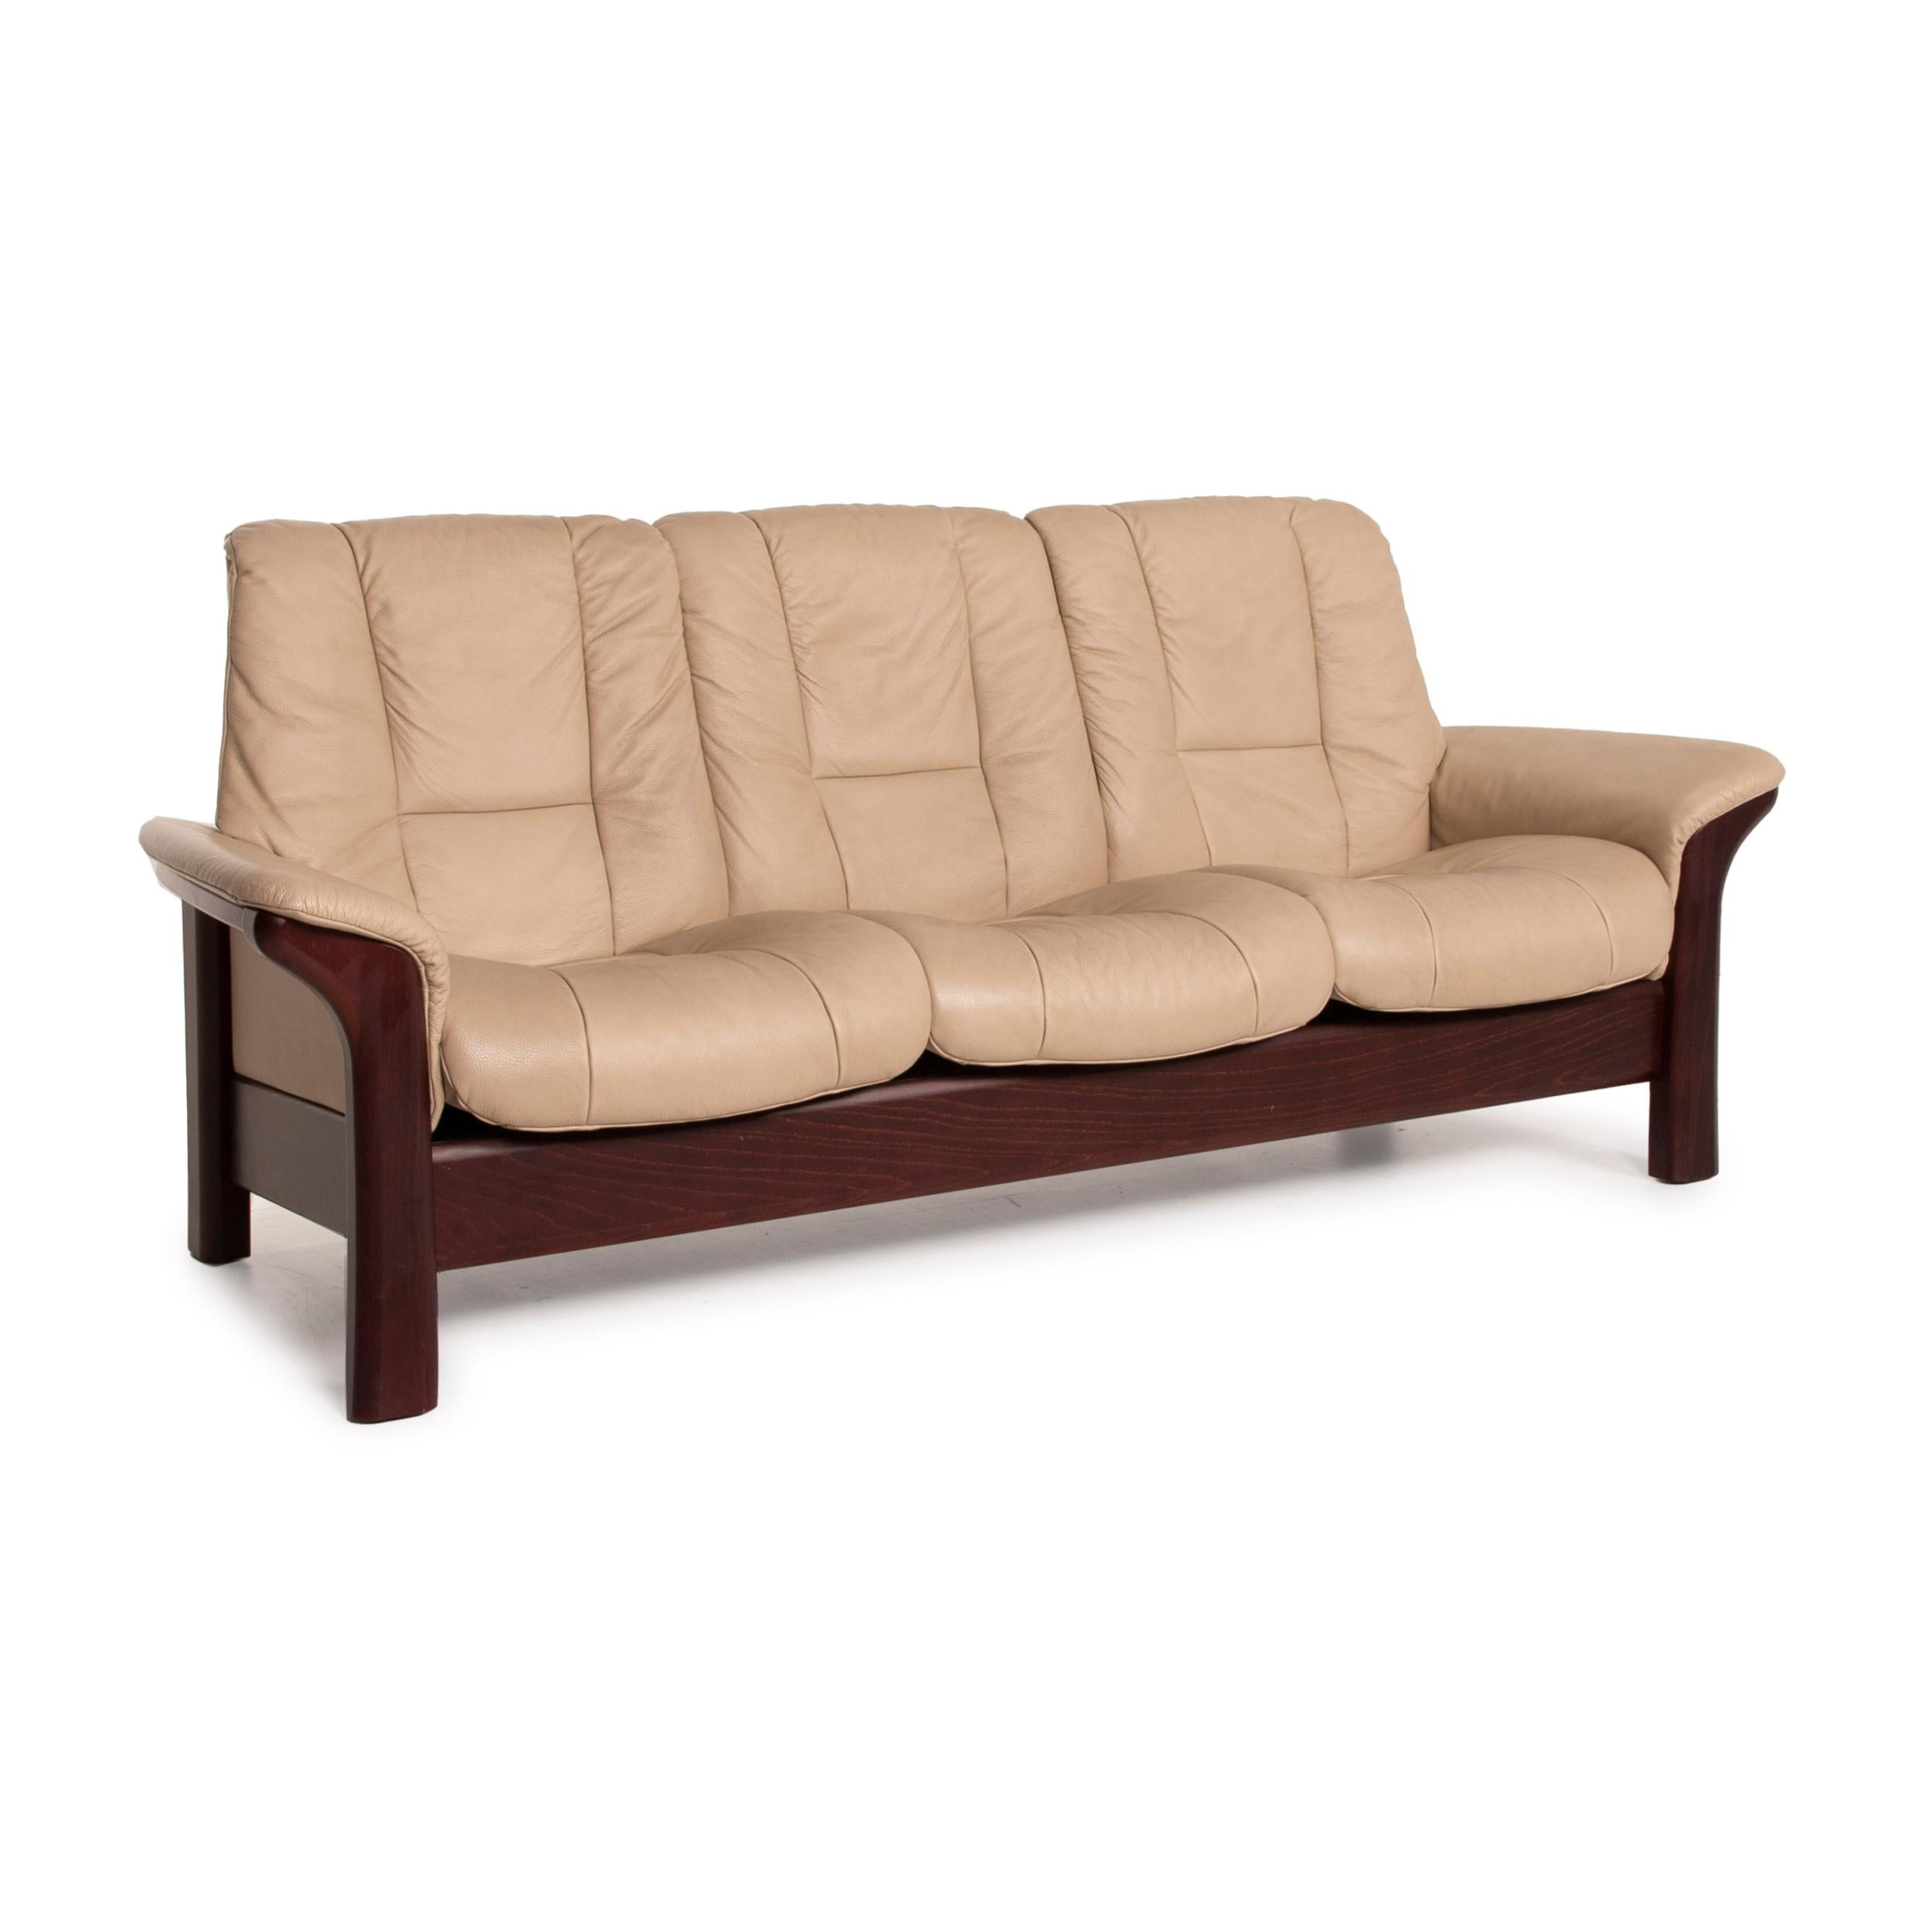 Stressless Windsor Leather Sofa Beige Three-Seater Relax Function 1